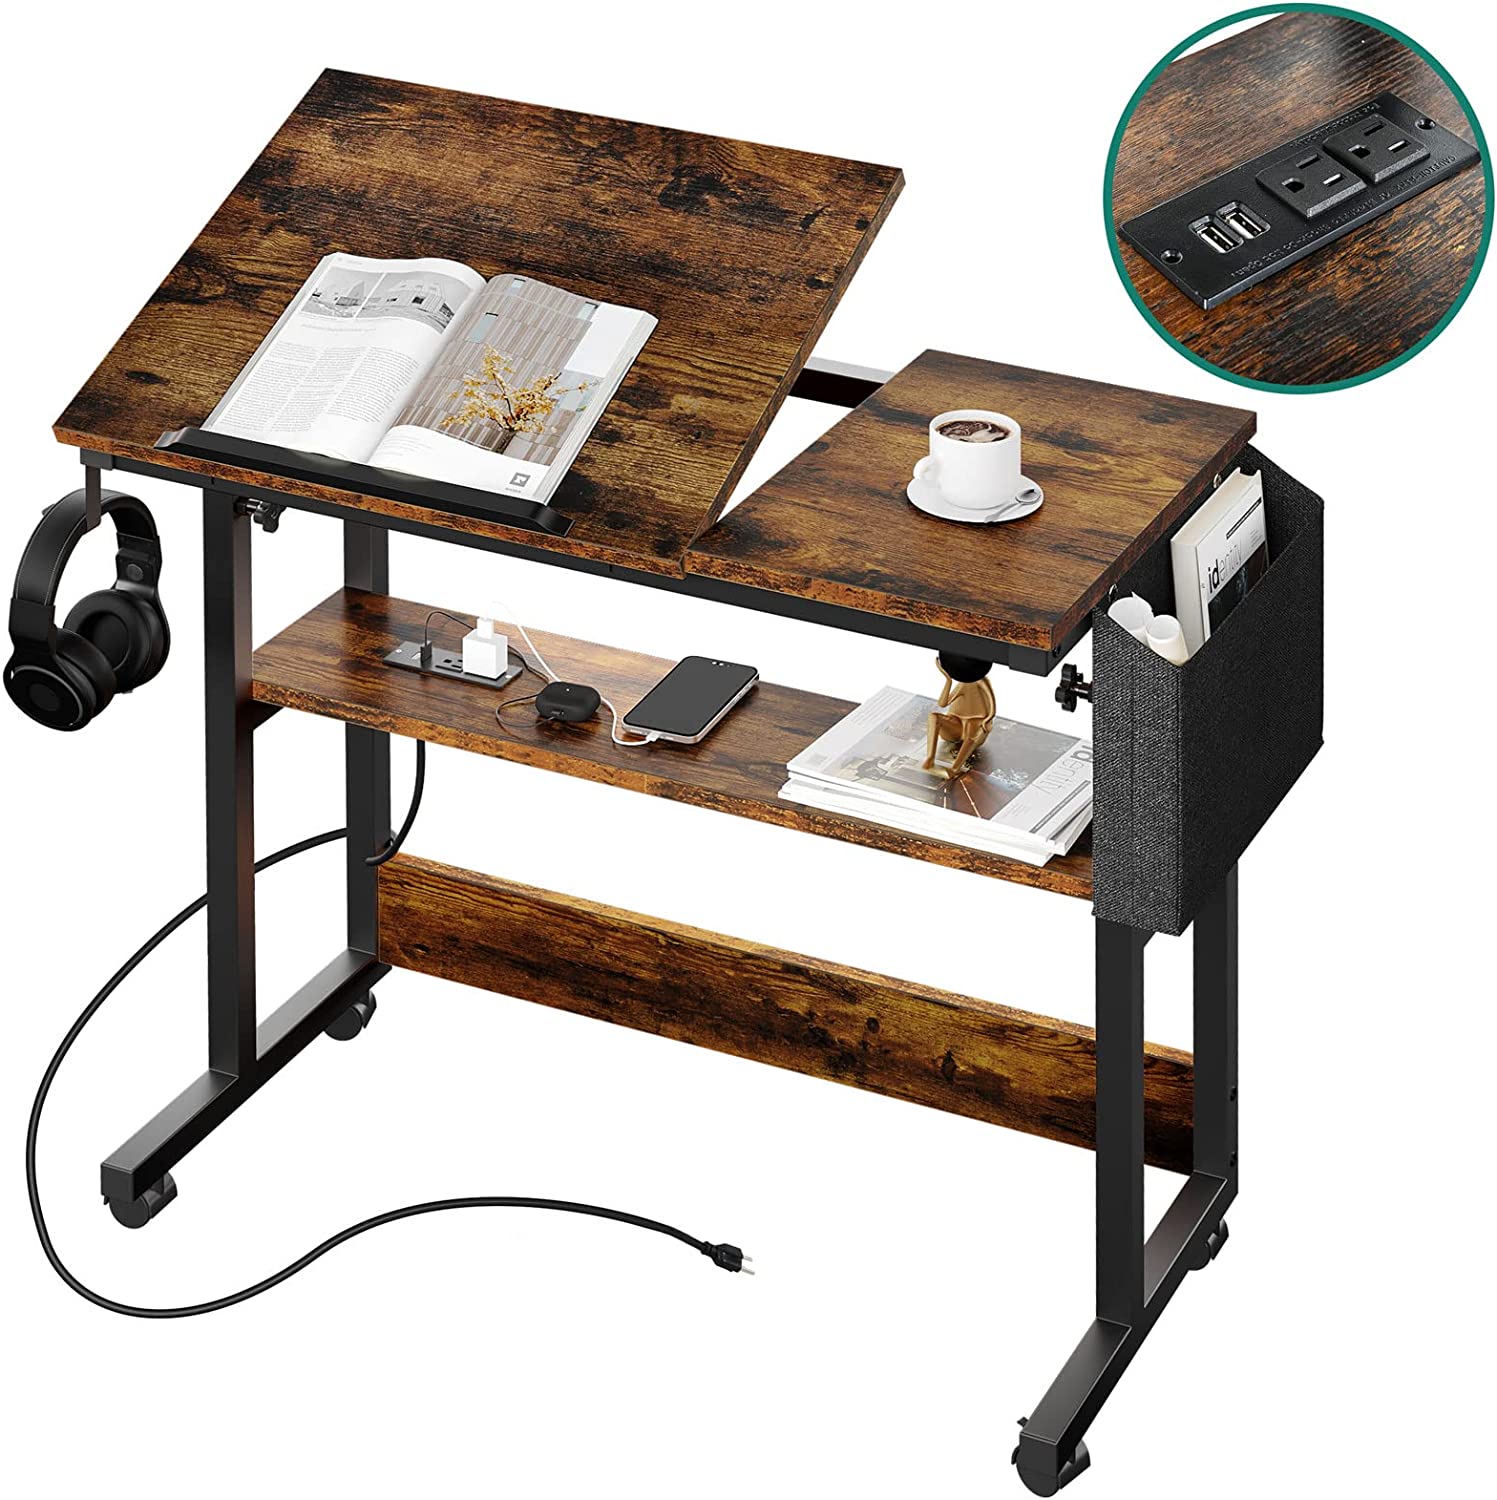 DEXTRUS Portable Laptop Table with Charging Station, Height Adjustable Standing Rolling Computer Desk with Tiltable Tabletop and Storage Bag - image 1 of 8